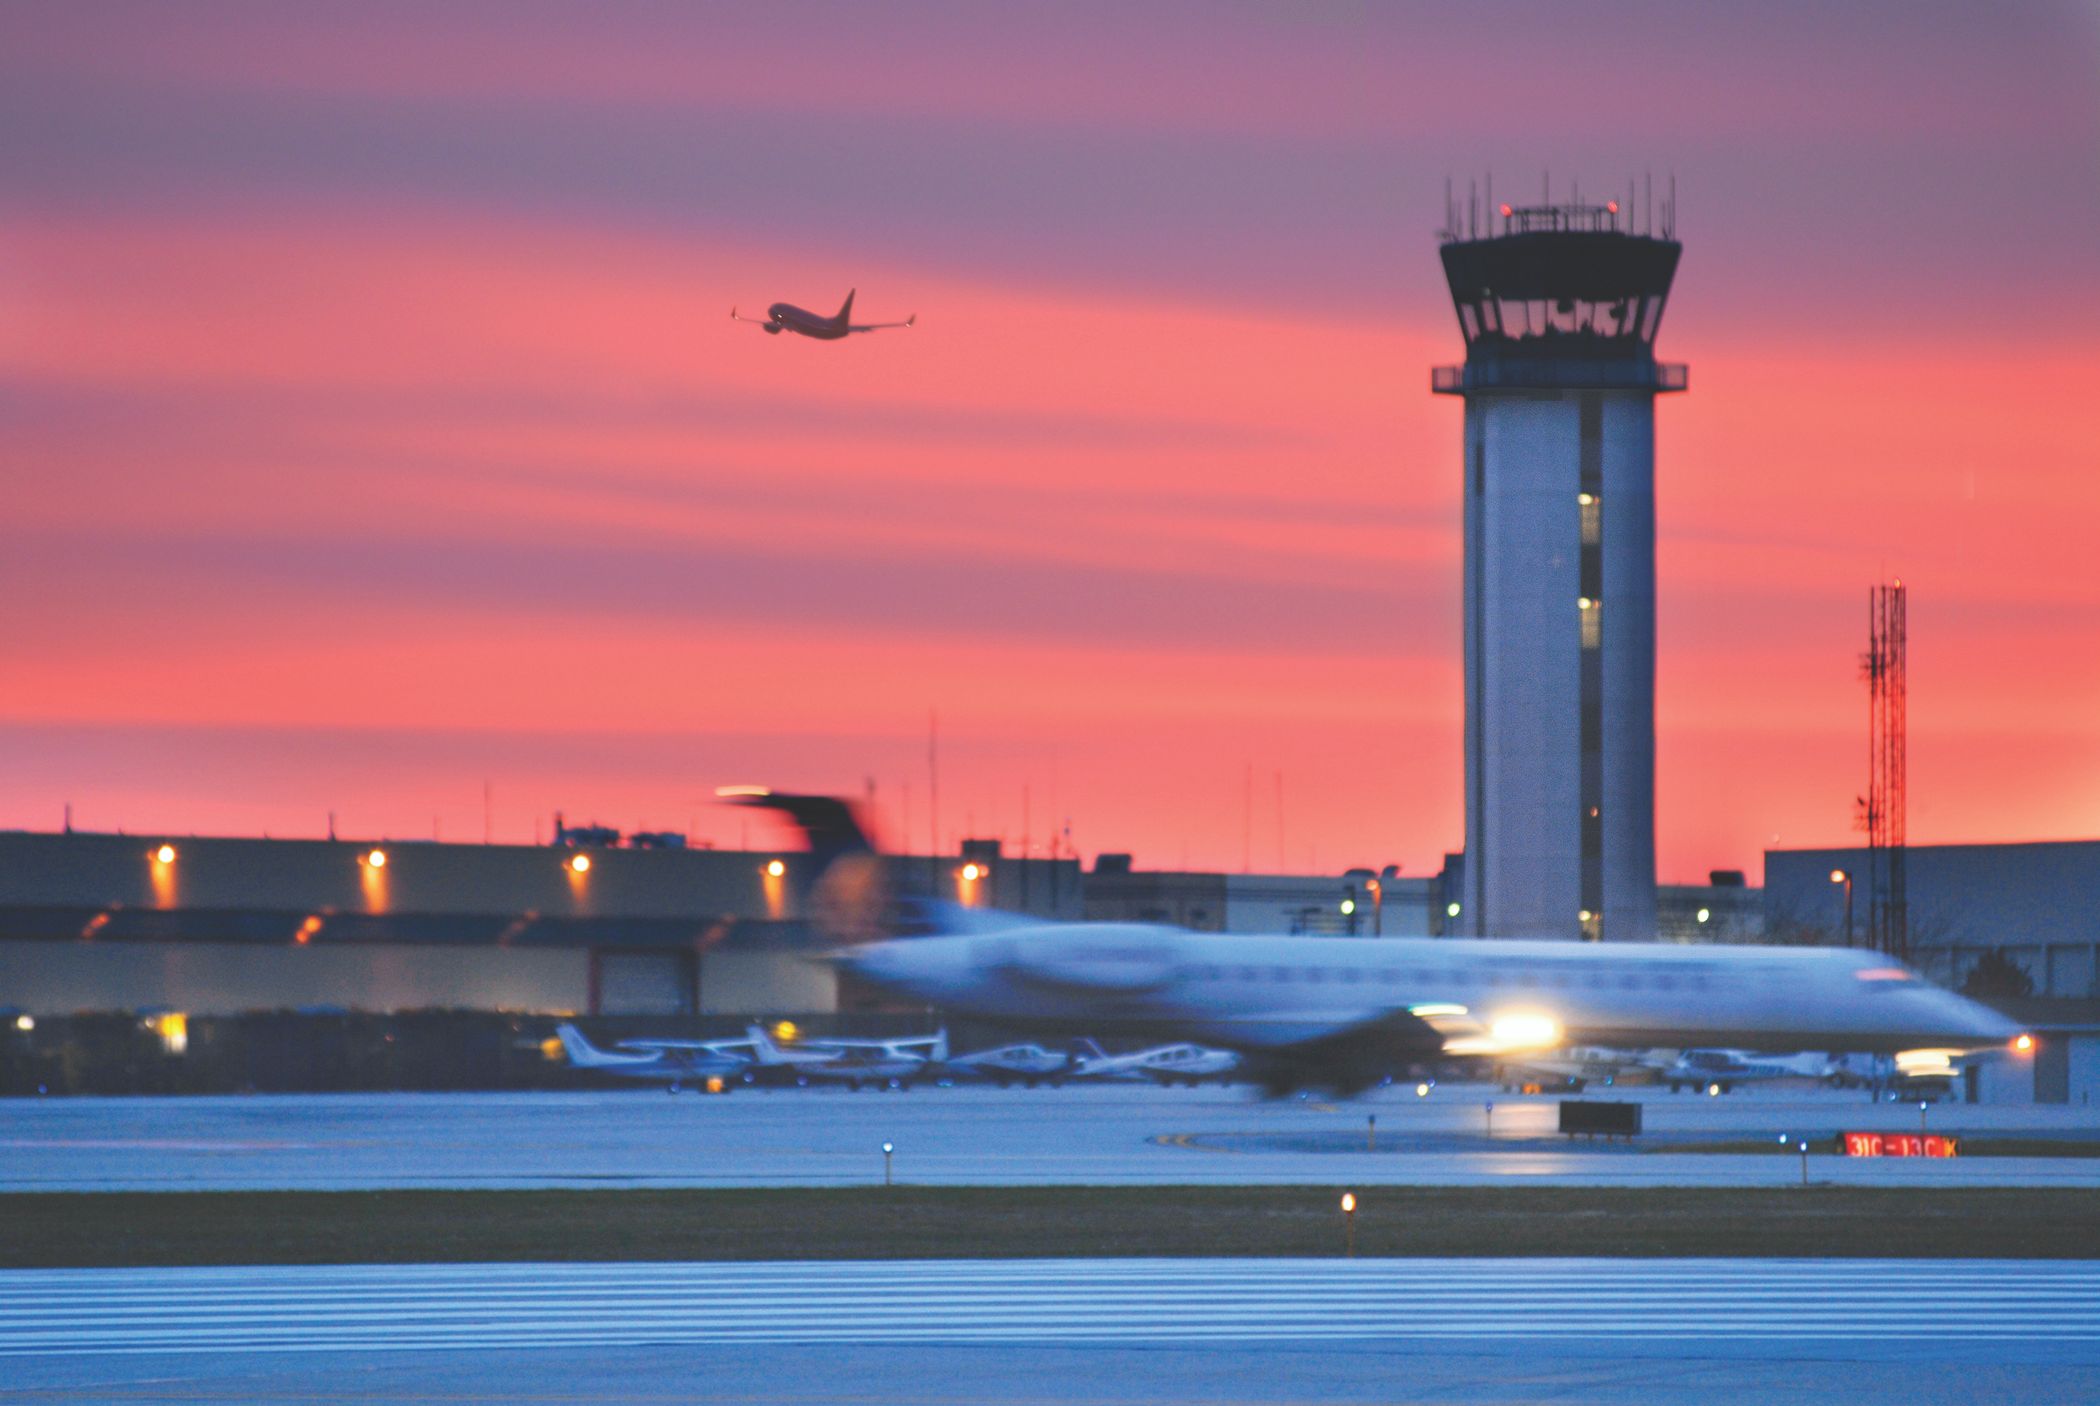 A panoramic view of Chicago Midway Airport at dusk.